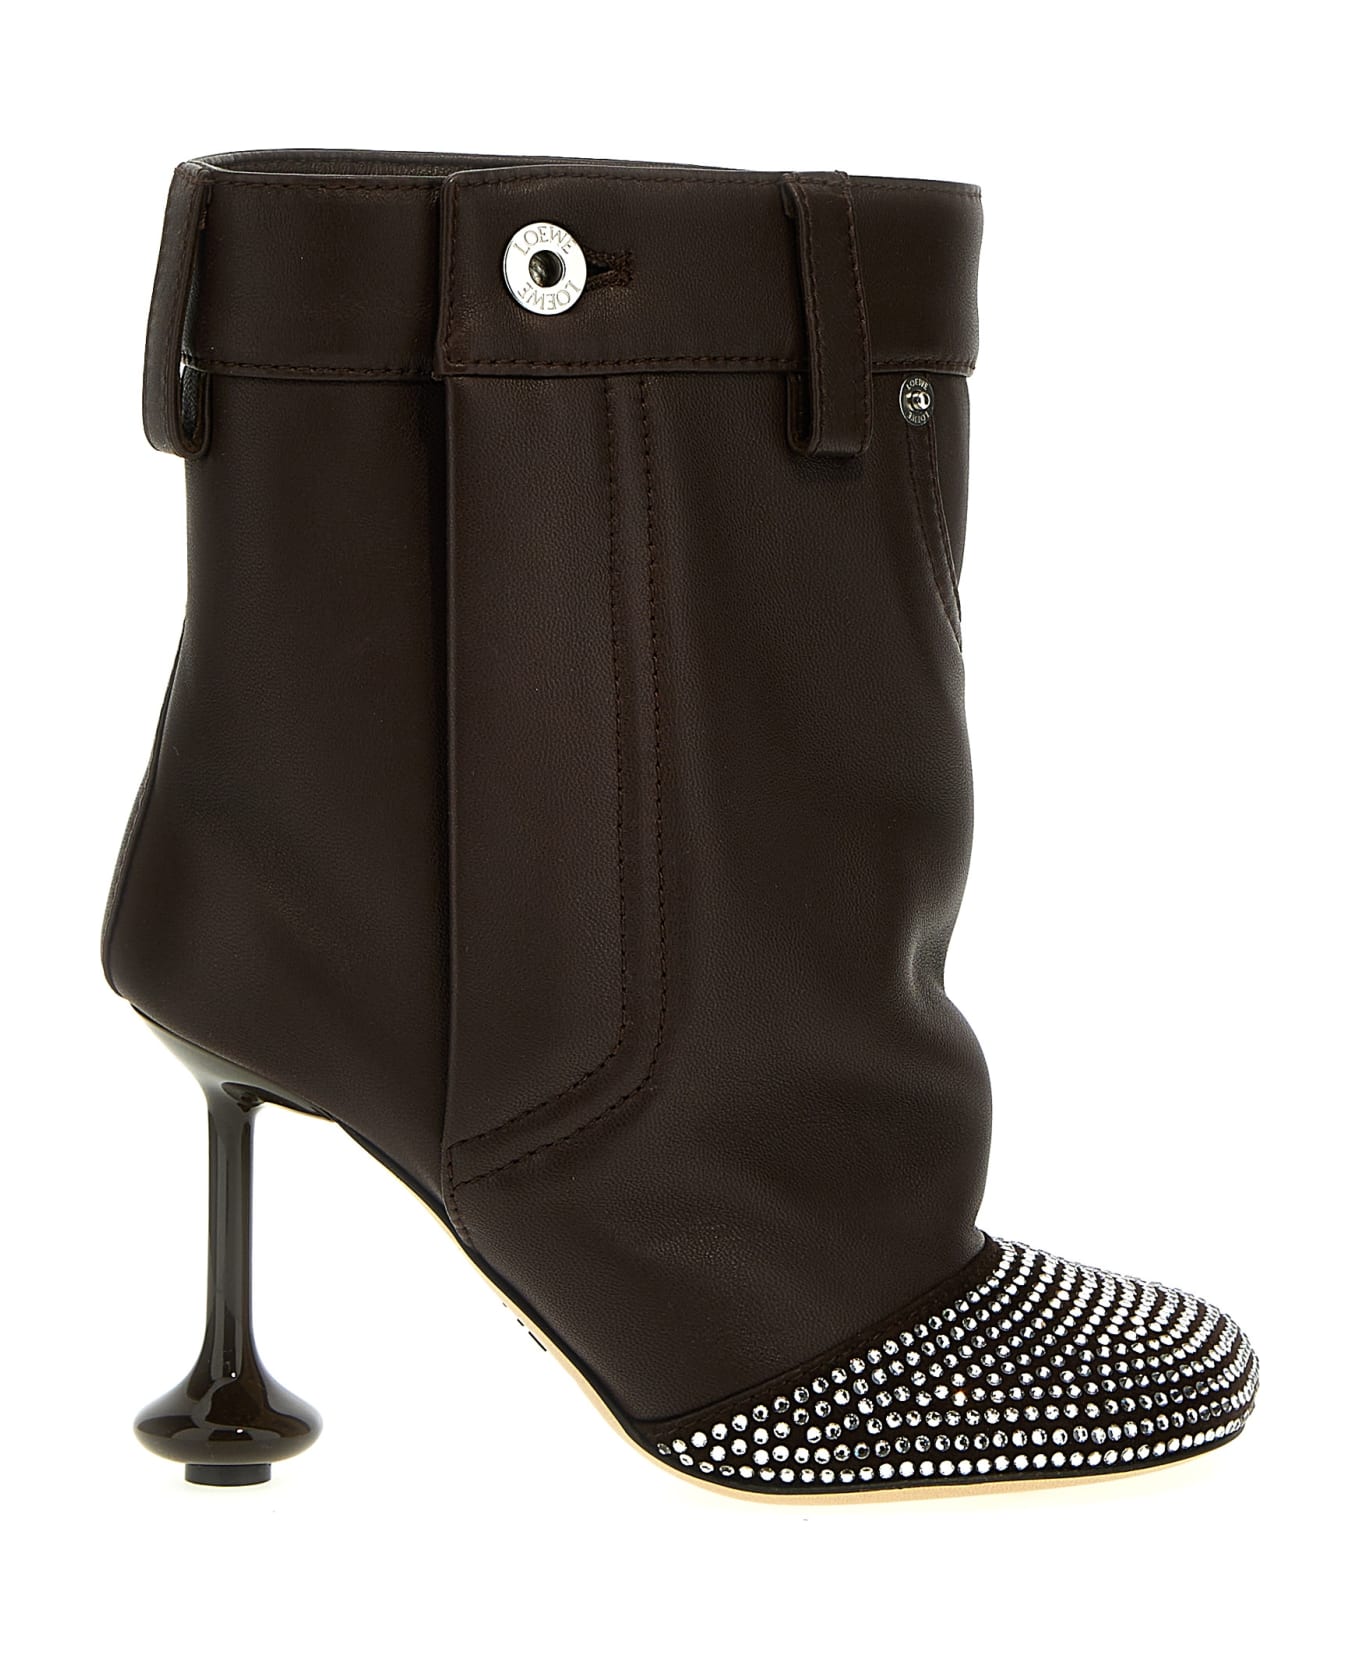 Loewe 'toy' Ankle Boots - Brown